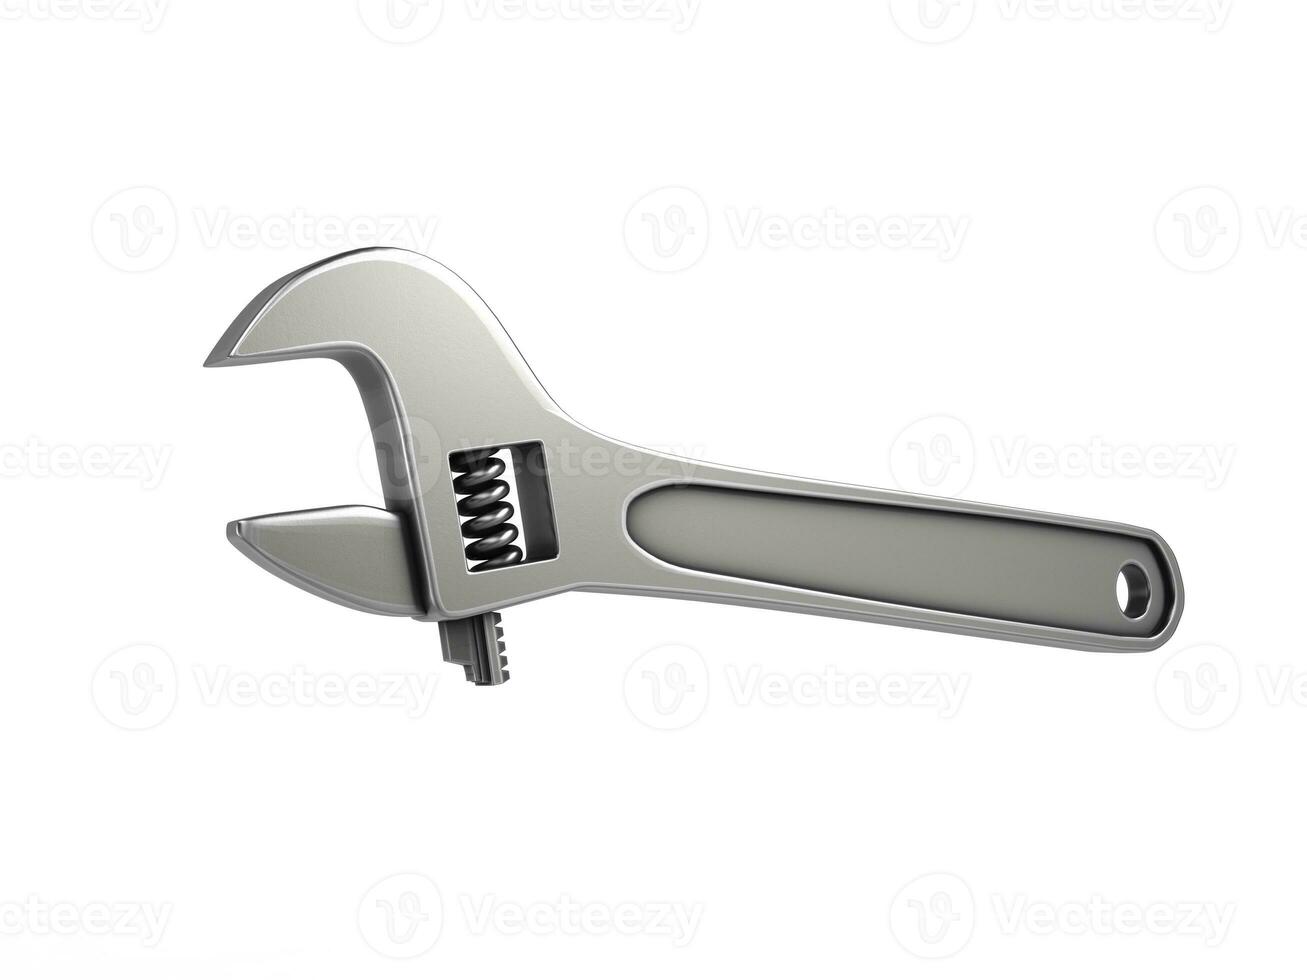 Brand new steel wrench - closeup shot - isolated on white background photo